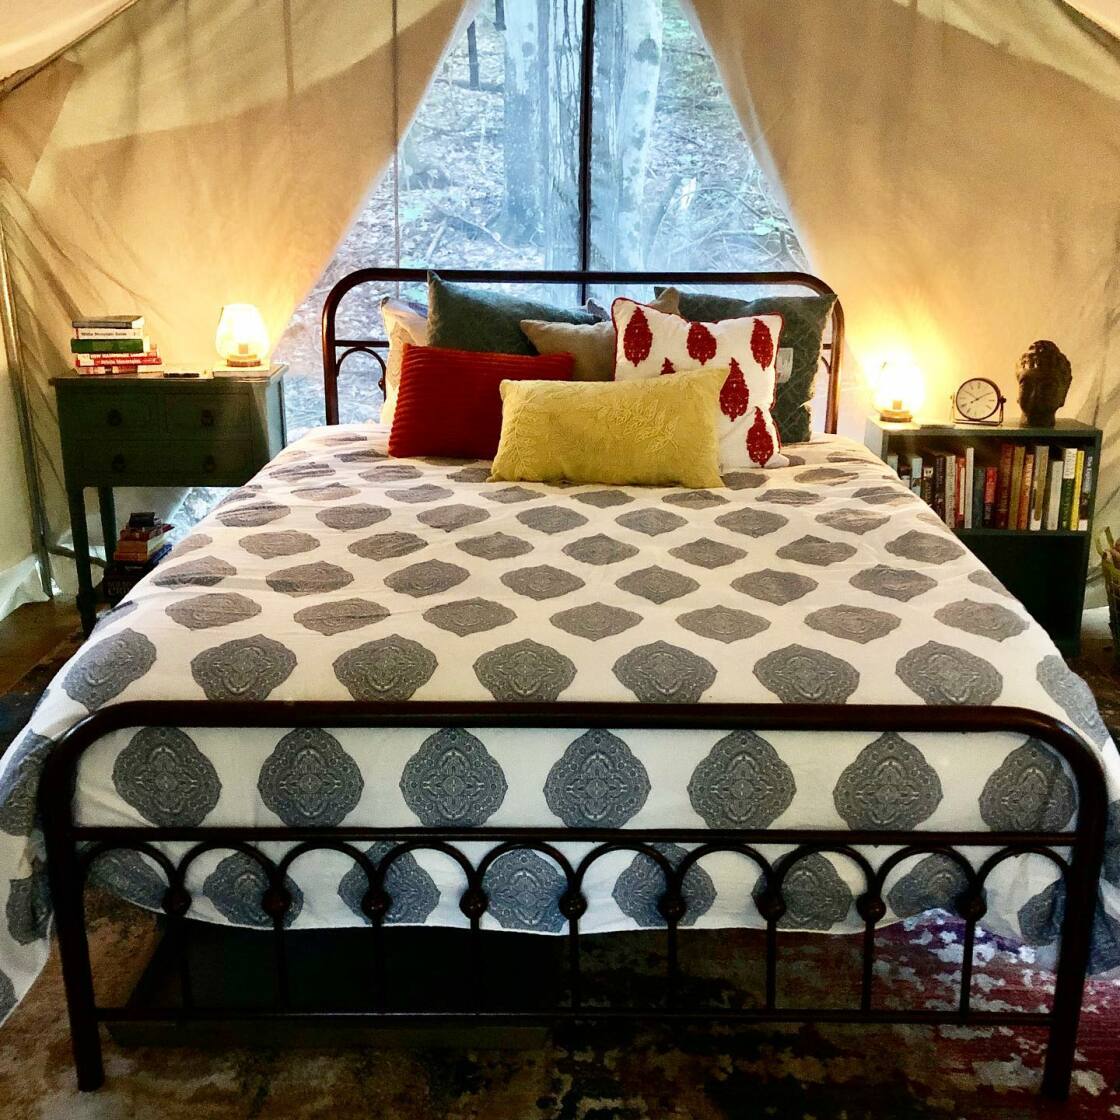 A double bed in a glamping sire